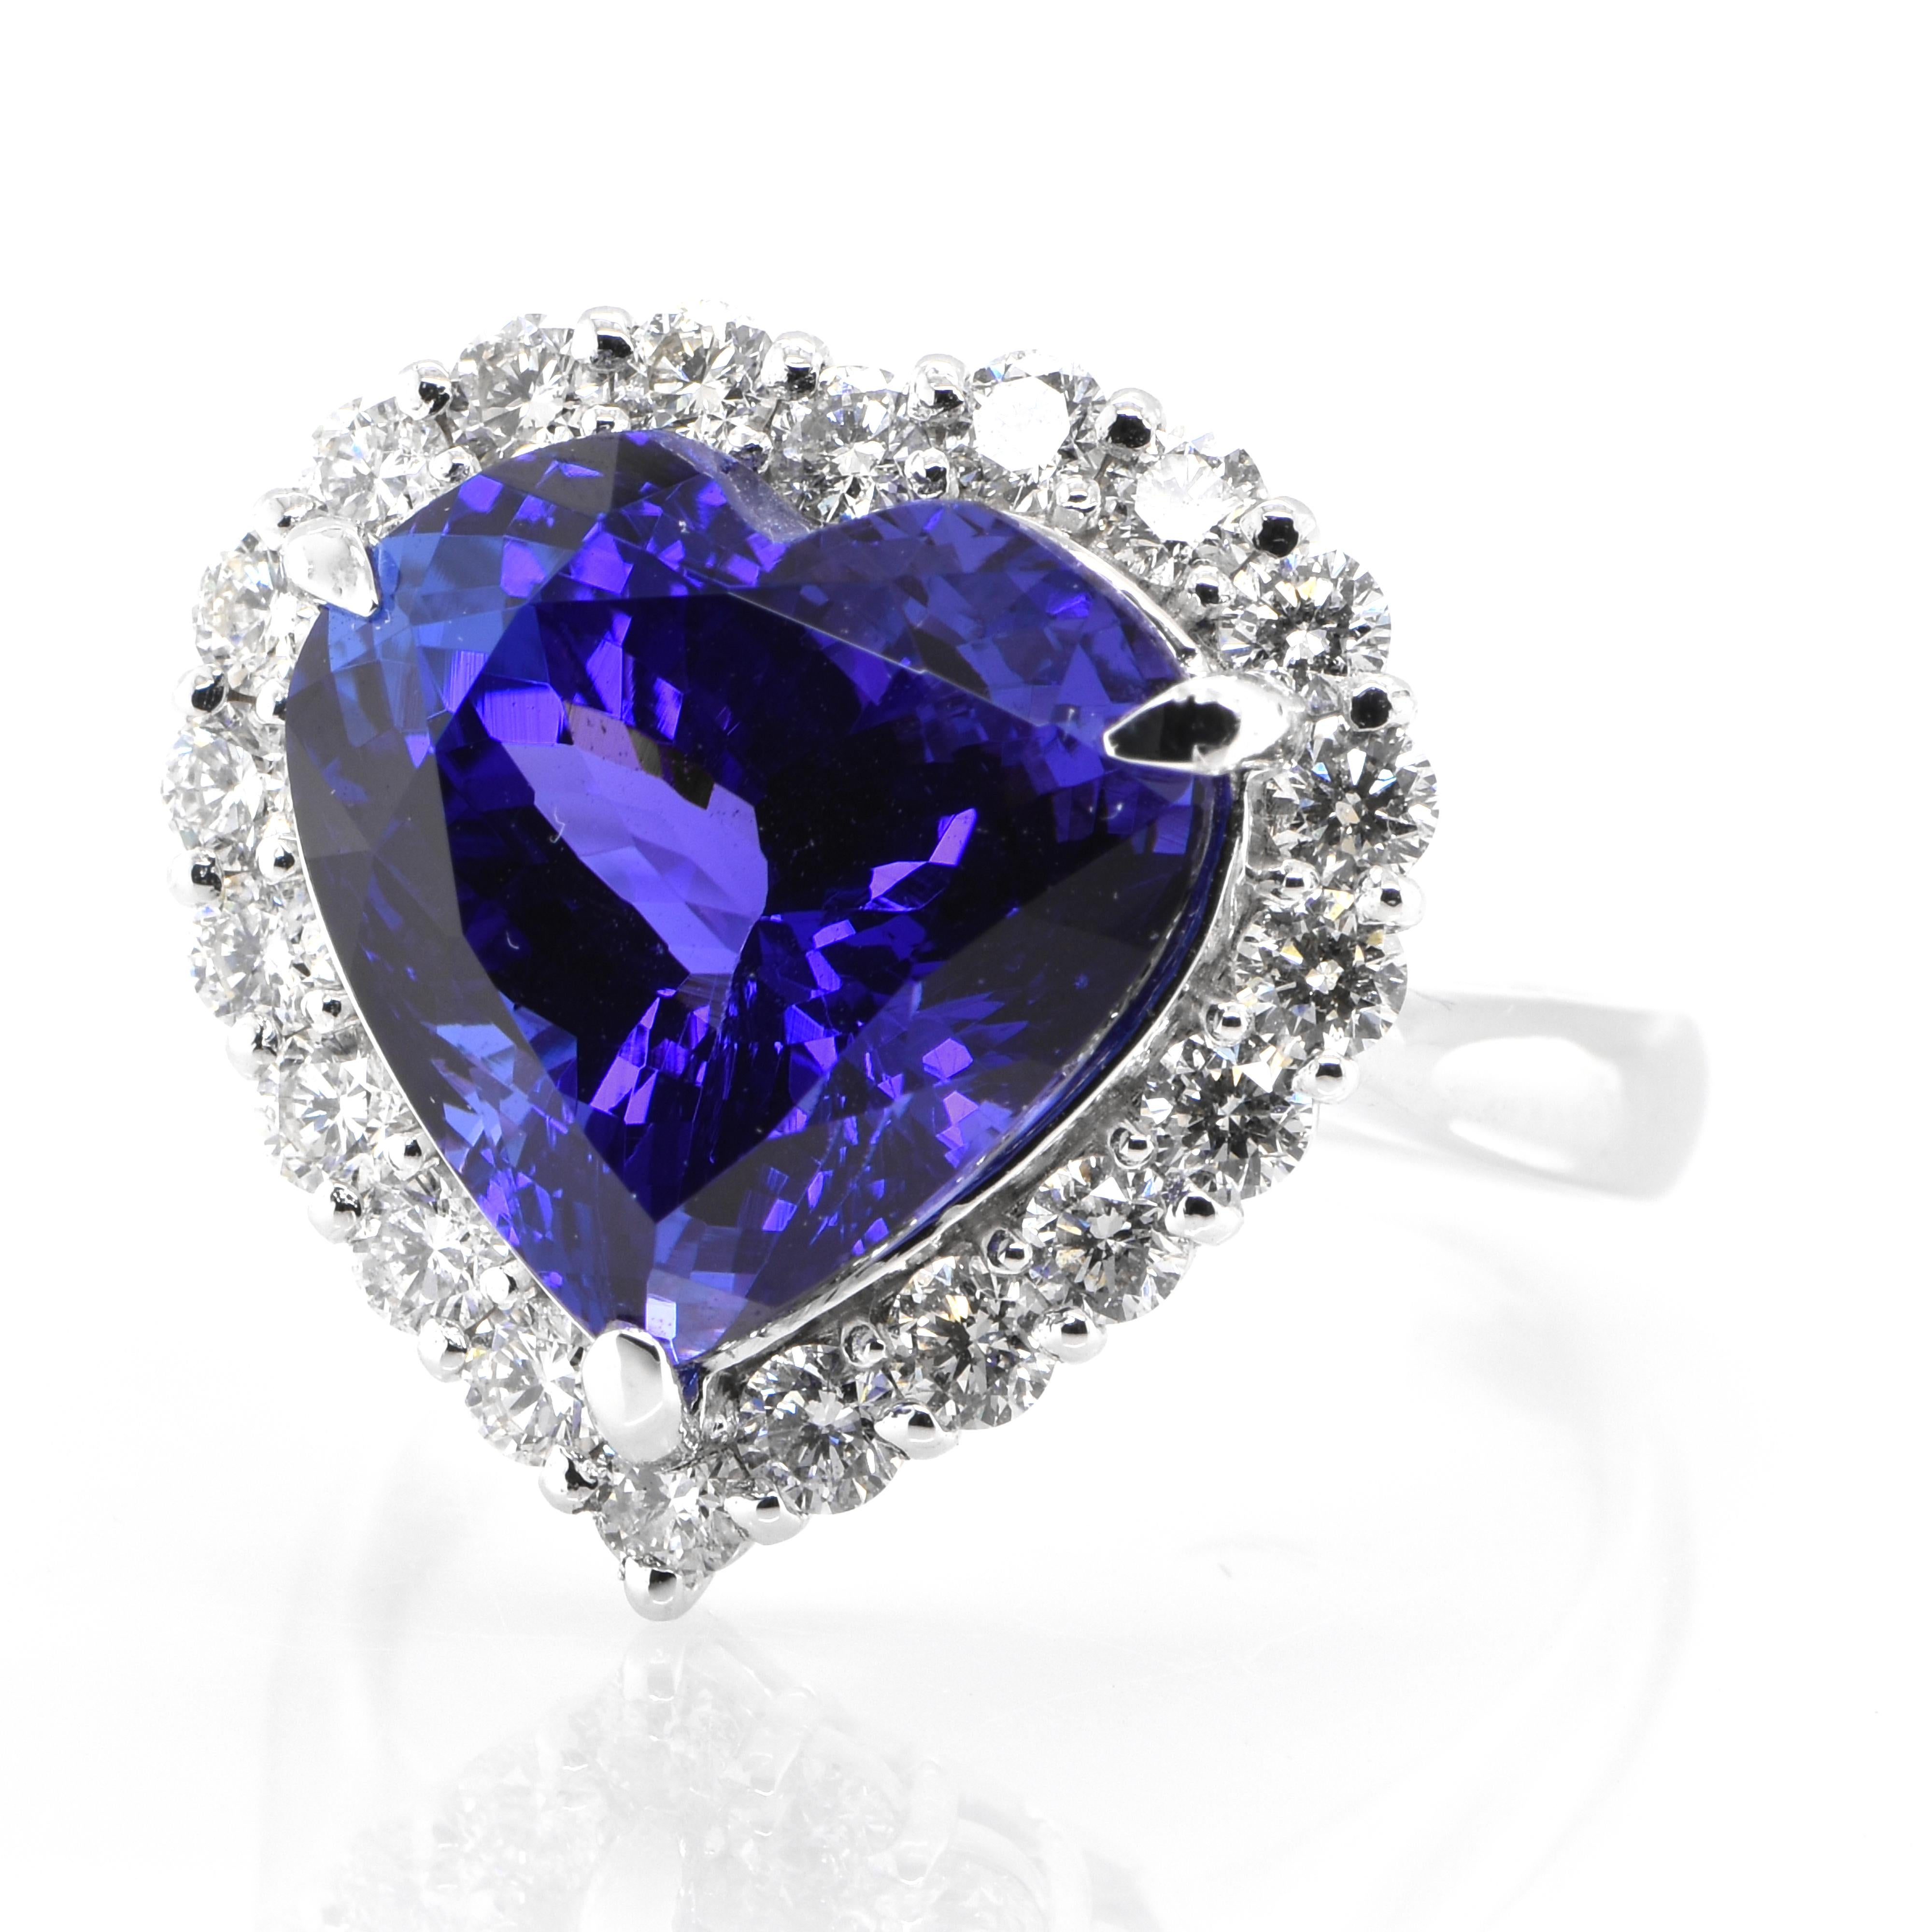 A beautiful Cocktail Ring featuring a 8.44 Carat Natural Tanzanite and 0.90 Carats of Diamond Accents set in Platinum. Tanzanite's name was given by Tiffany and Co after its only known source: Tanzania. Tanzanite displays beautiful pleochroic colors